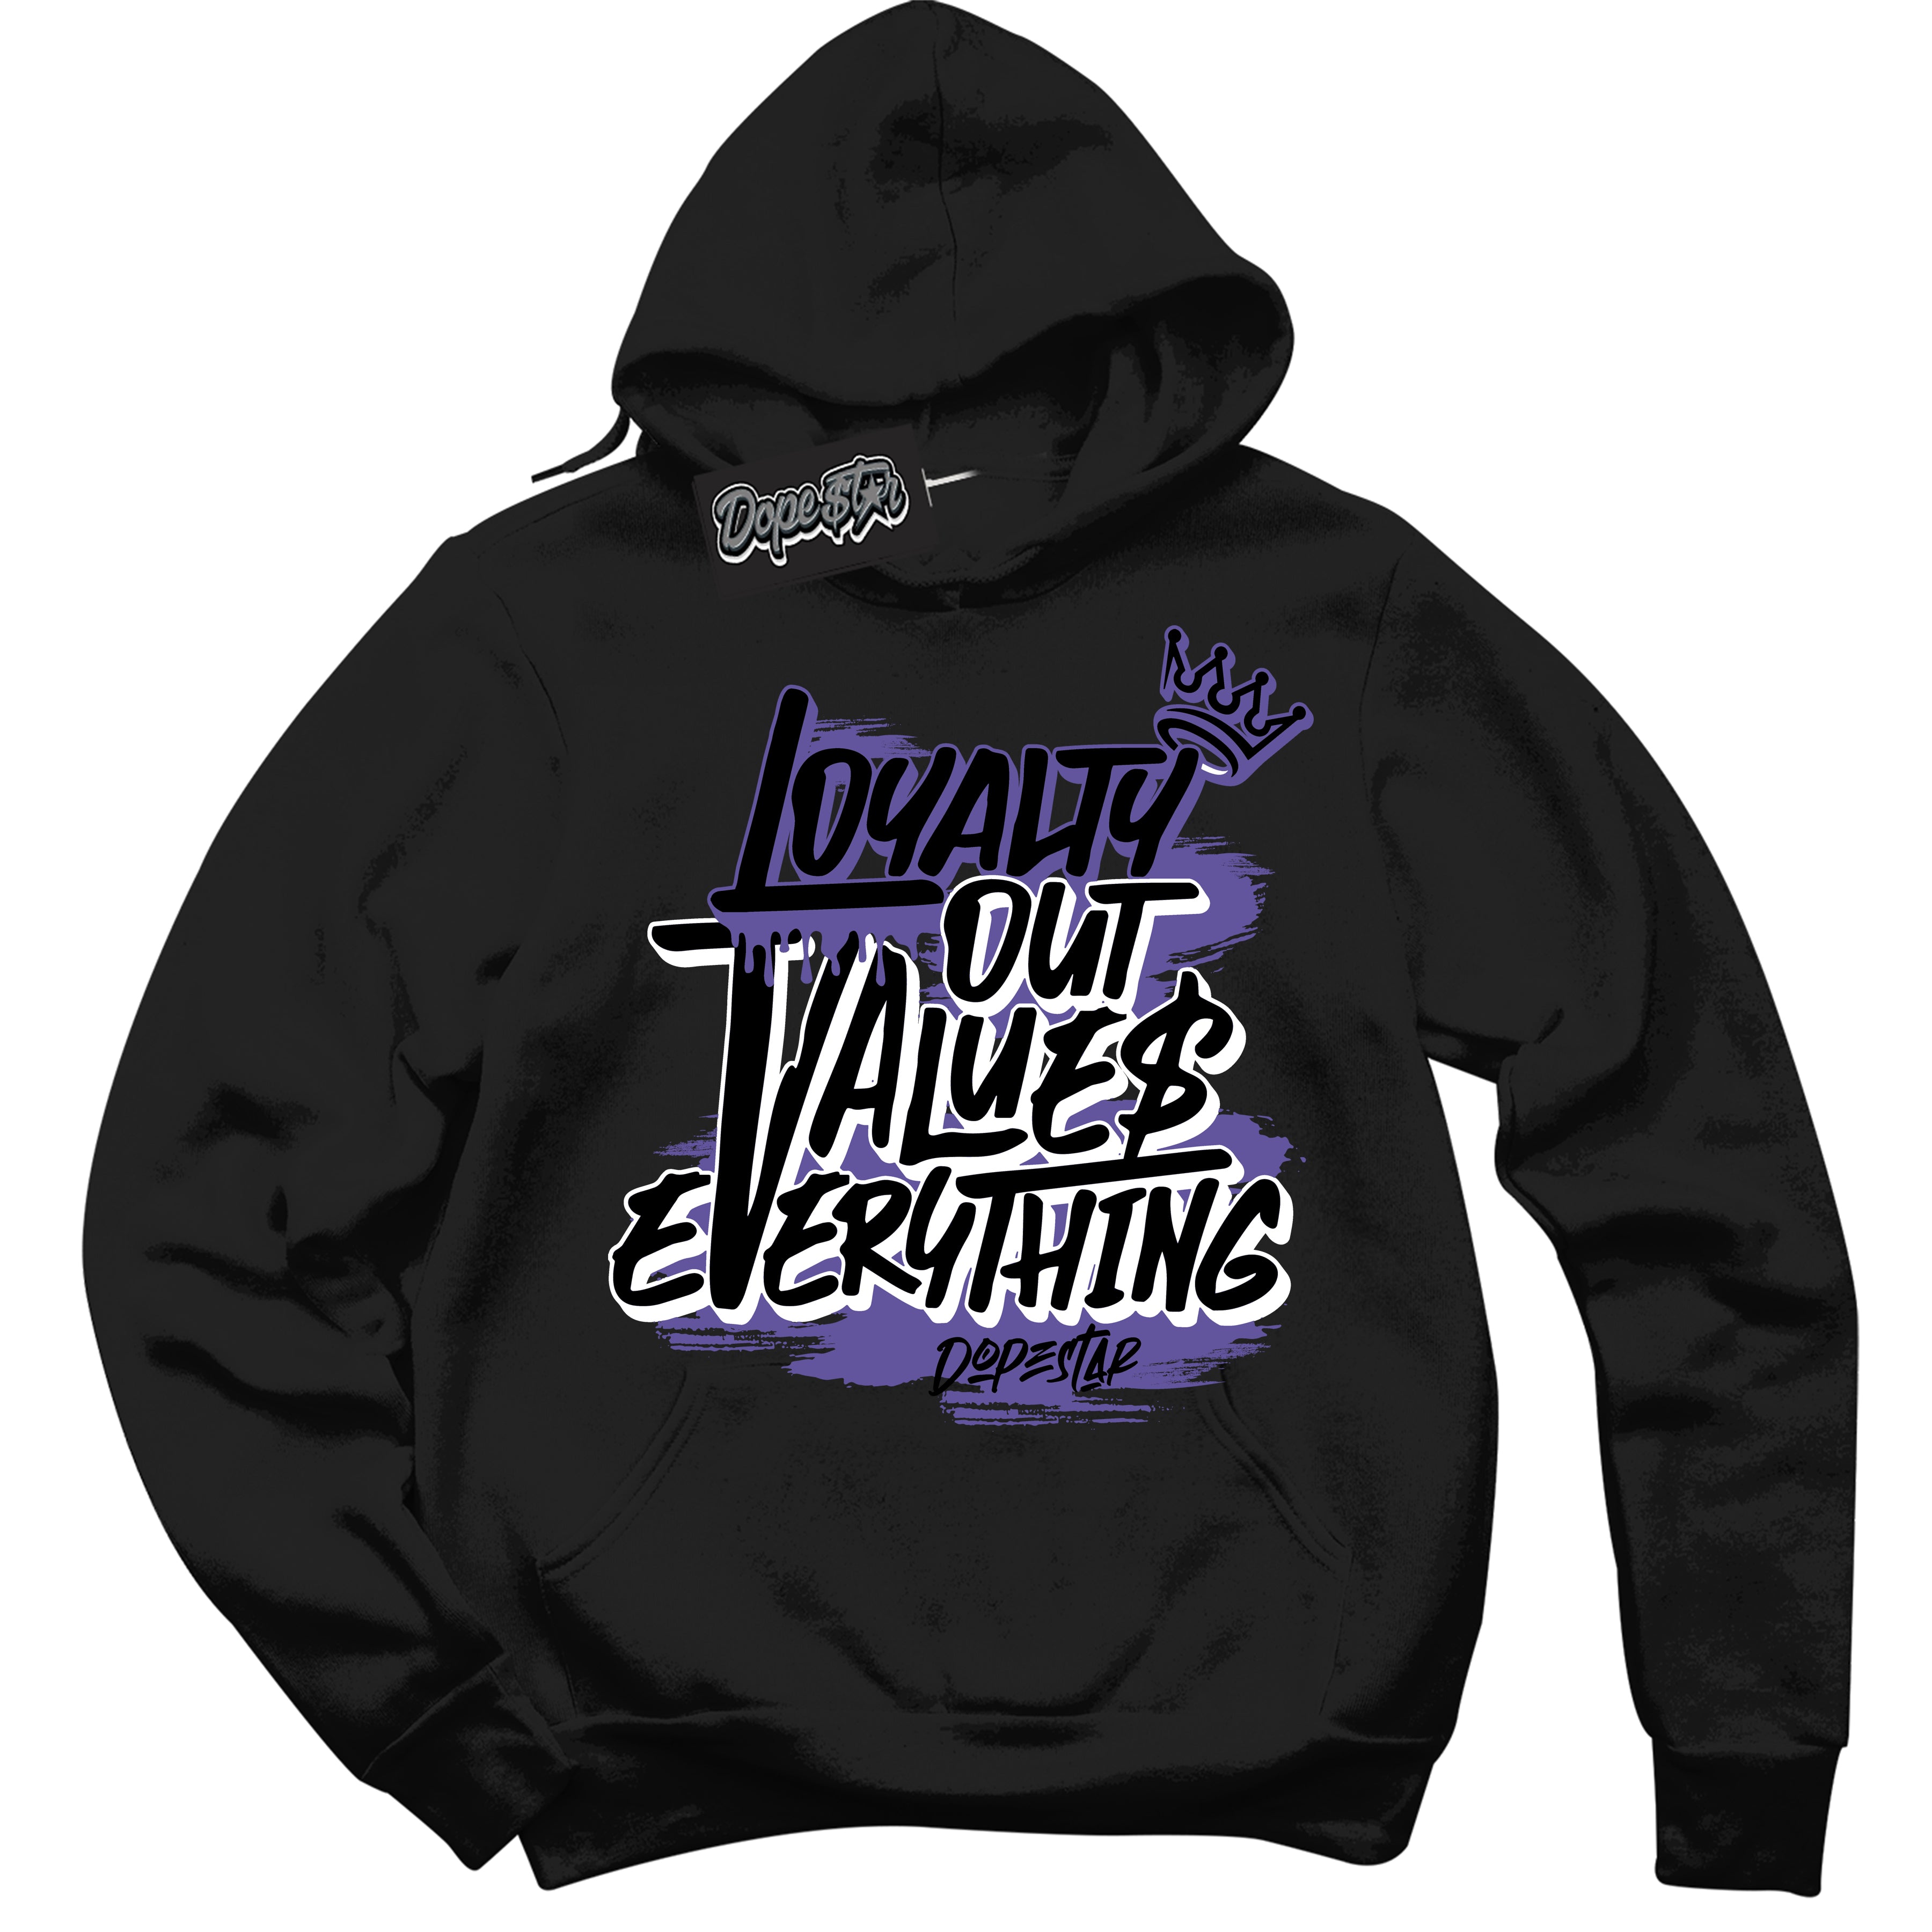 Cool Black Hoodie with “ Loyalty Out Values Everything ”  design that Perfectly Matches  Psychic Purple Sneakers.